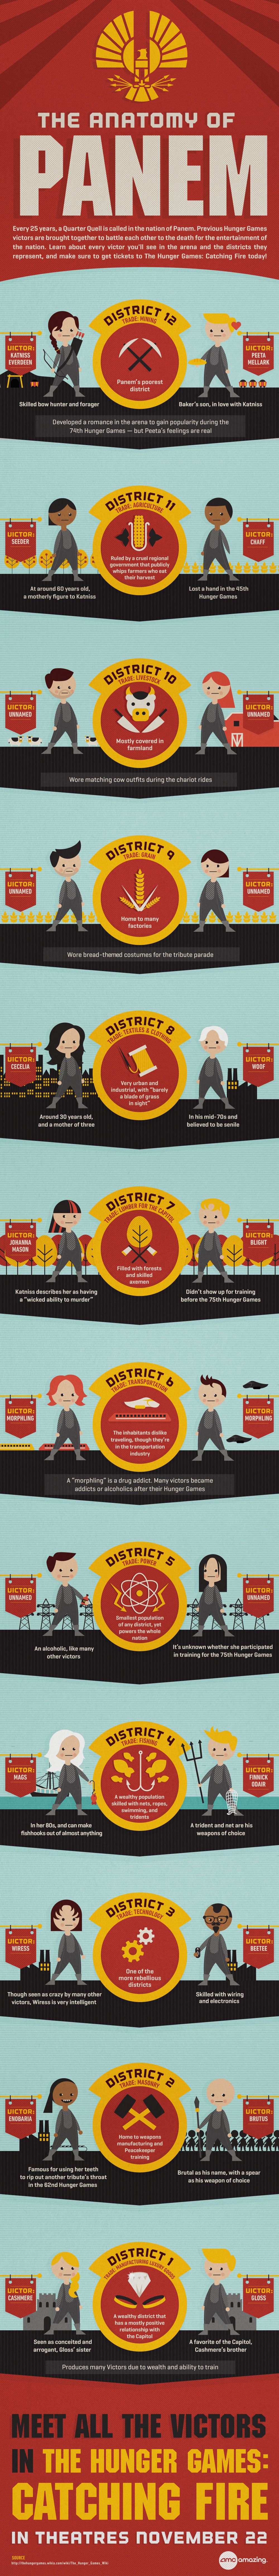 Content Marketing Done Right: AMC Theatres' THE HUNGER GAMES: CATCHING FIRE Infographic